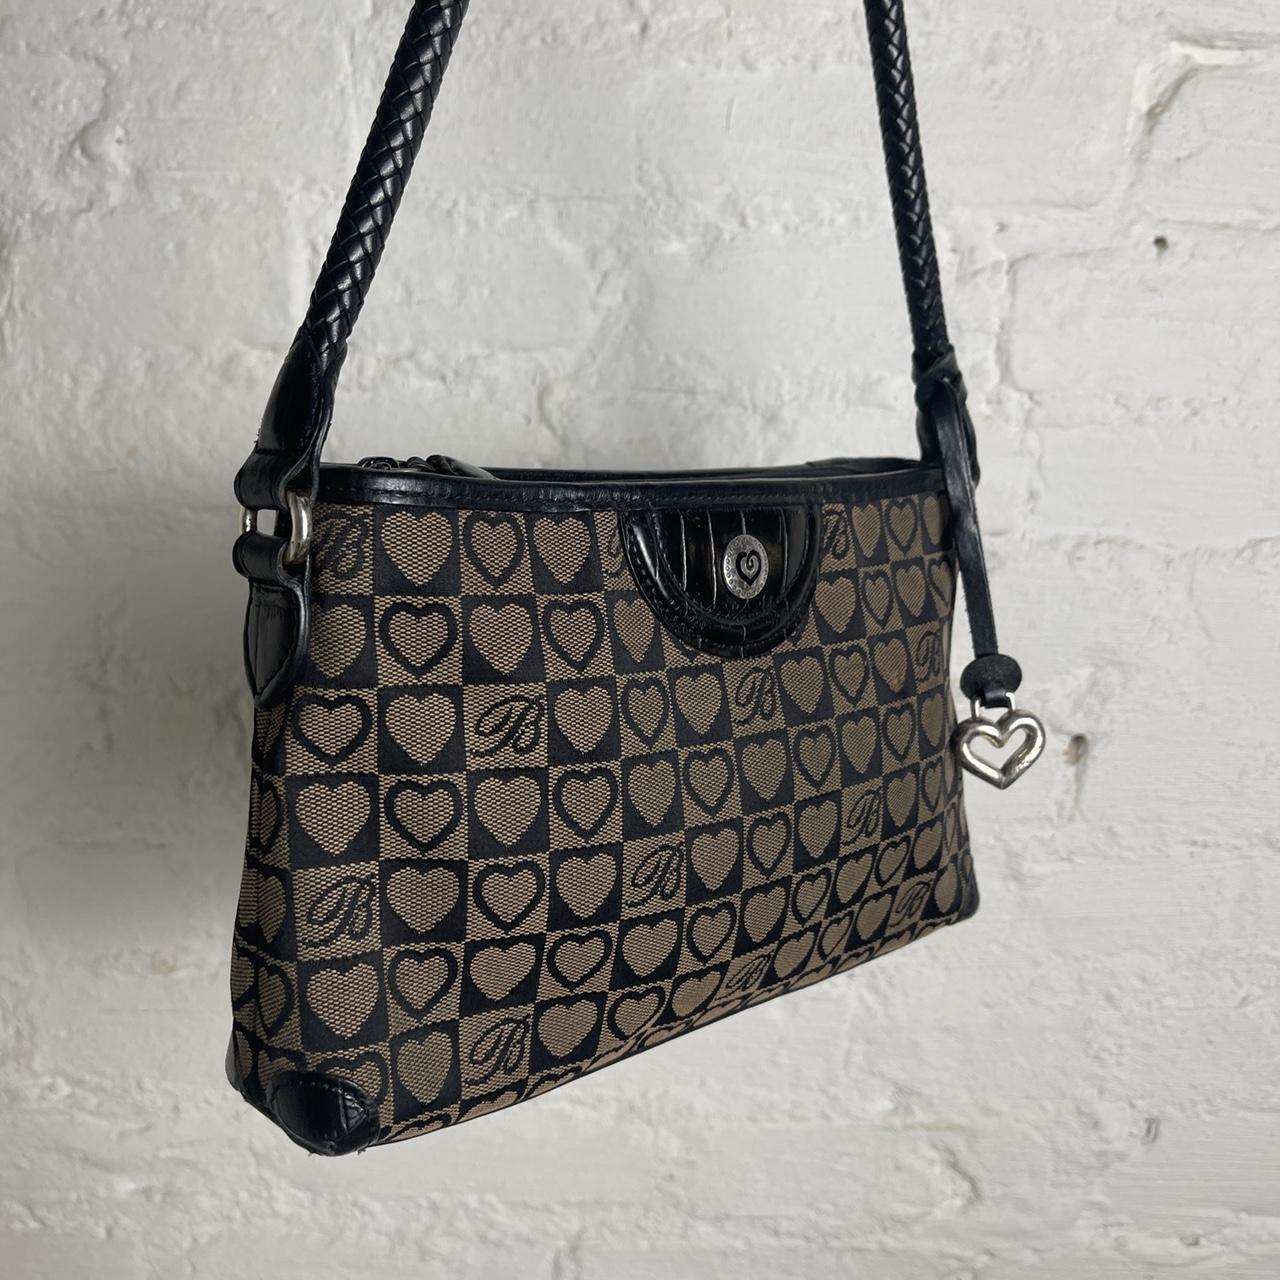 Brighton Heart Black Pebbled Leather Purse - clothing & accessories - by  owner - apparel sale - craigslist